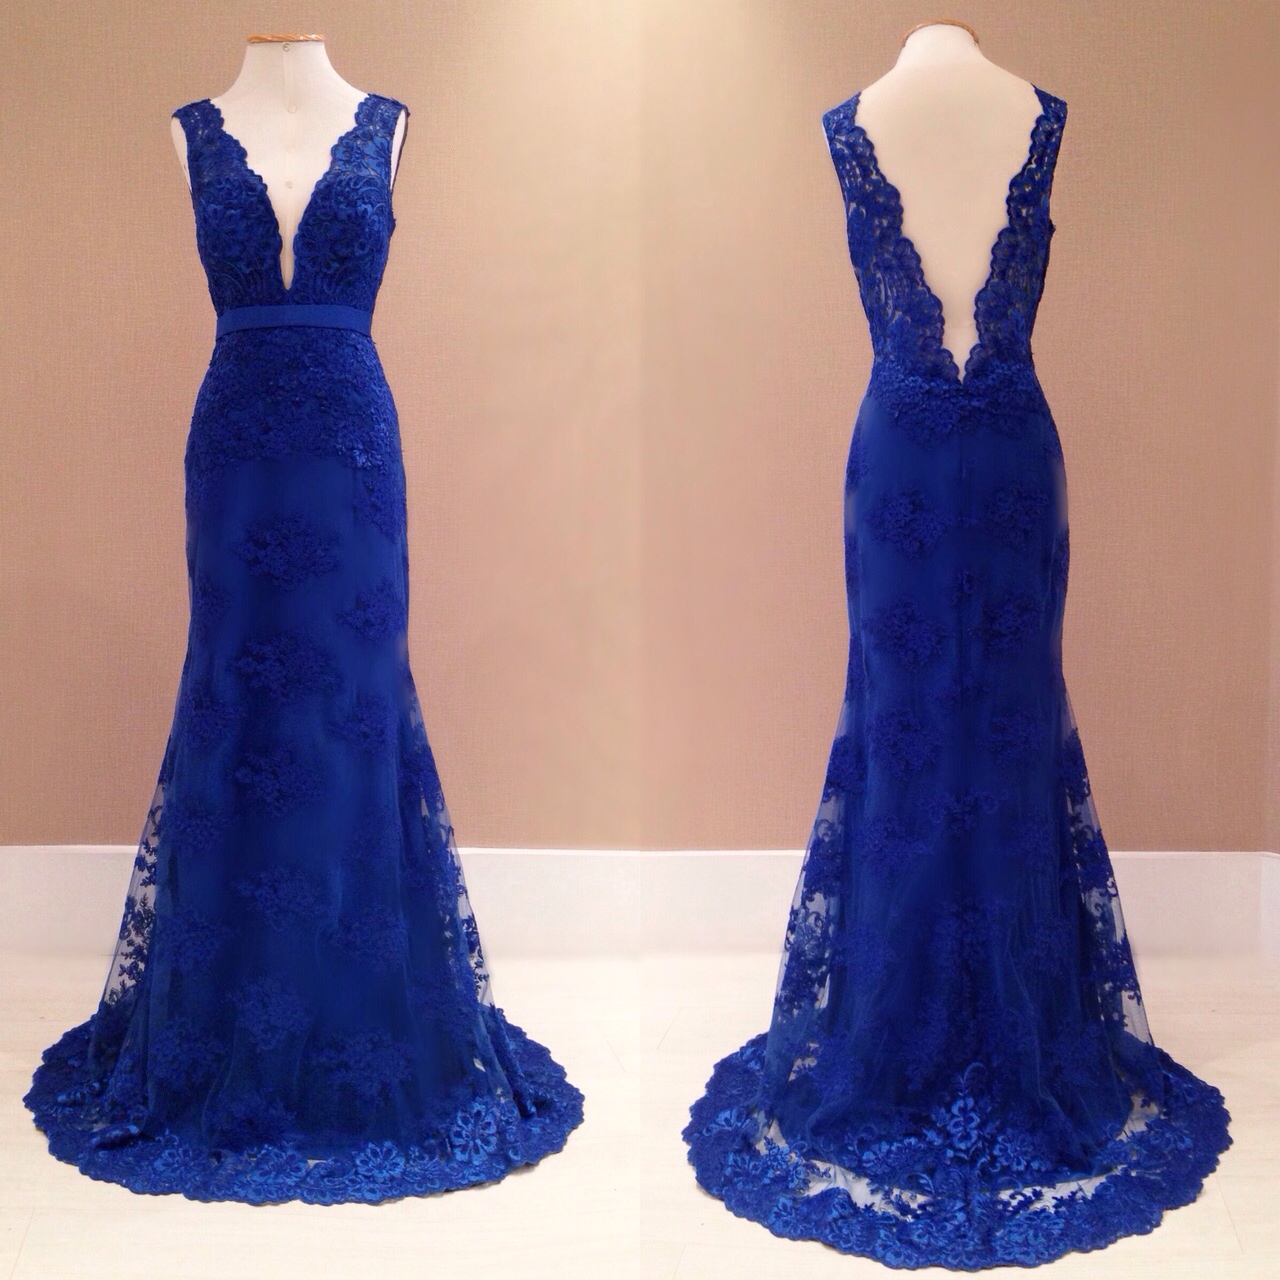 Mermaid Prom Gown,Royal Blue Evening Gowns,Party Dresses,Mermaid ...